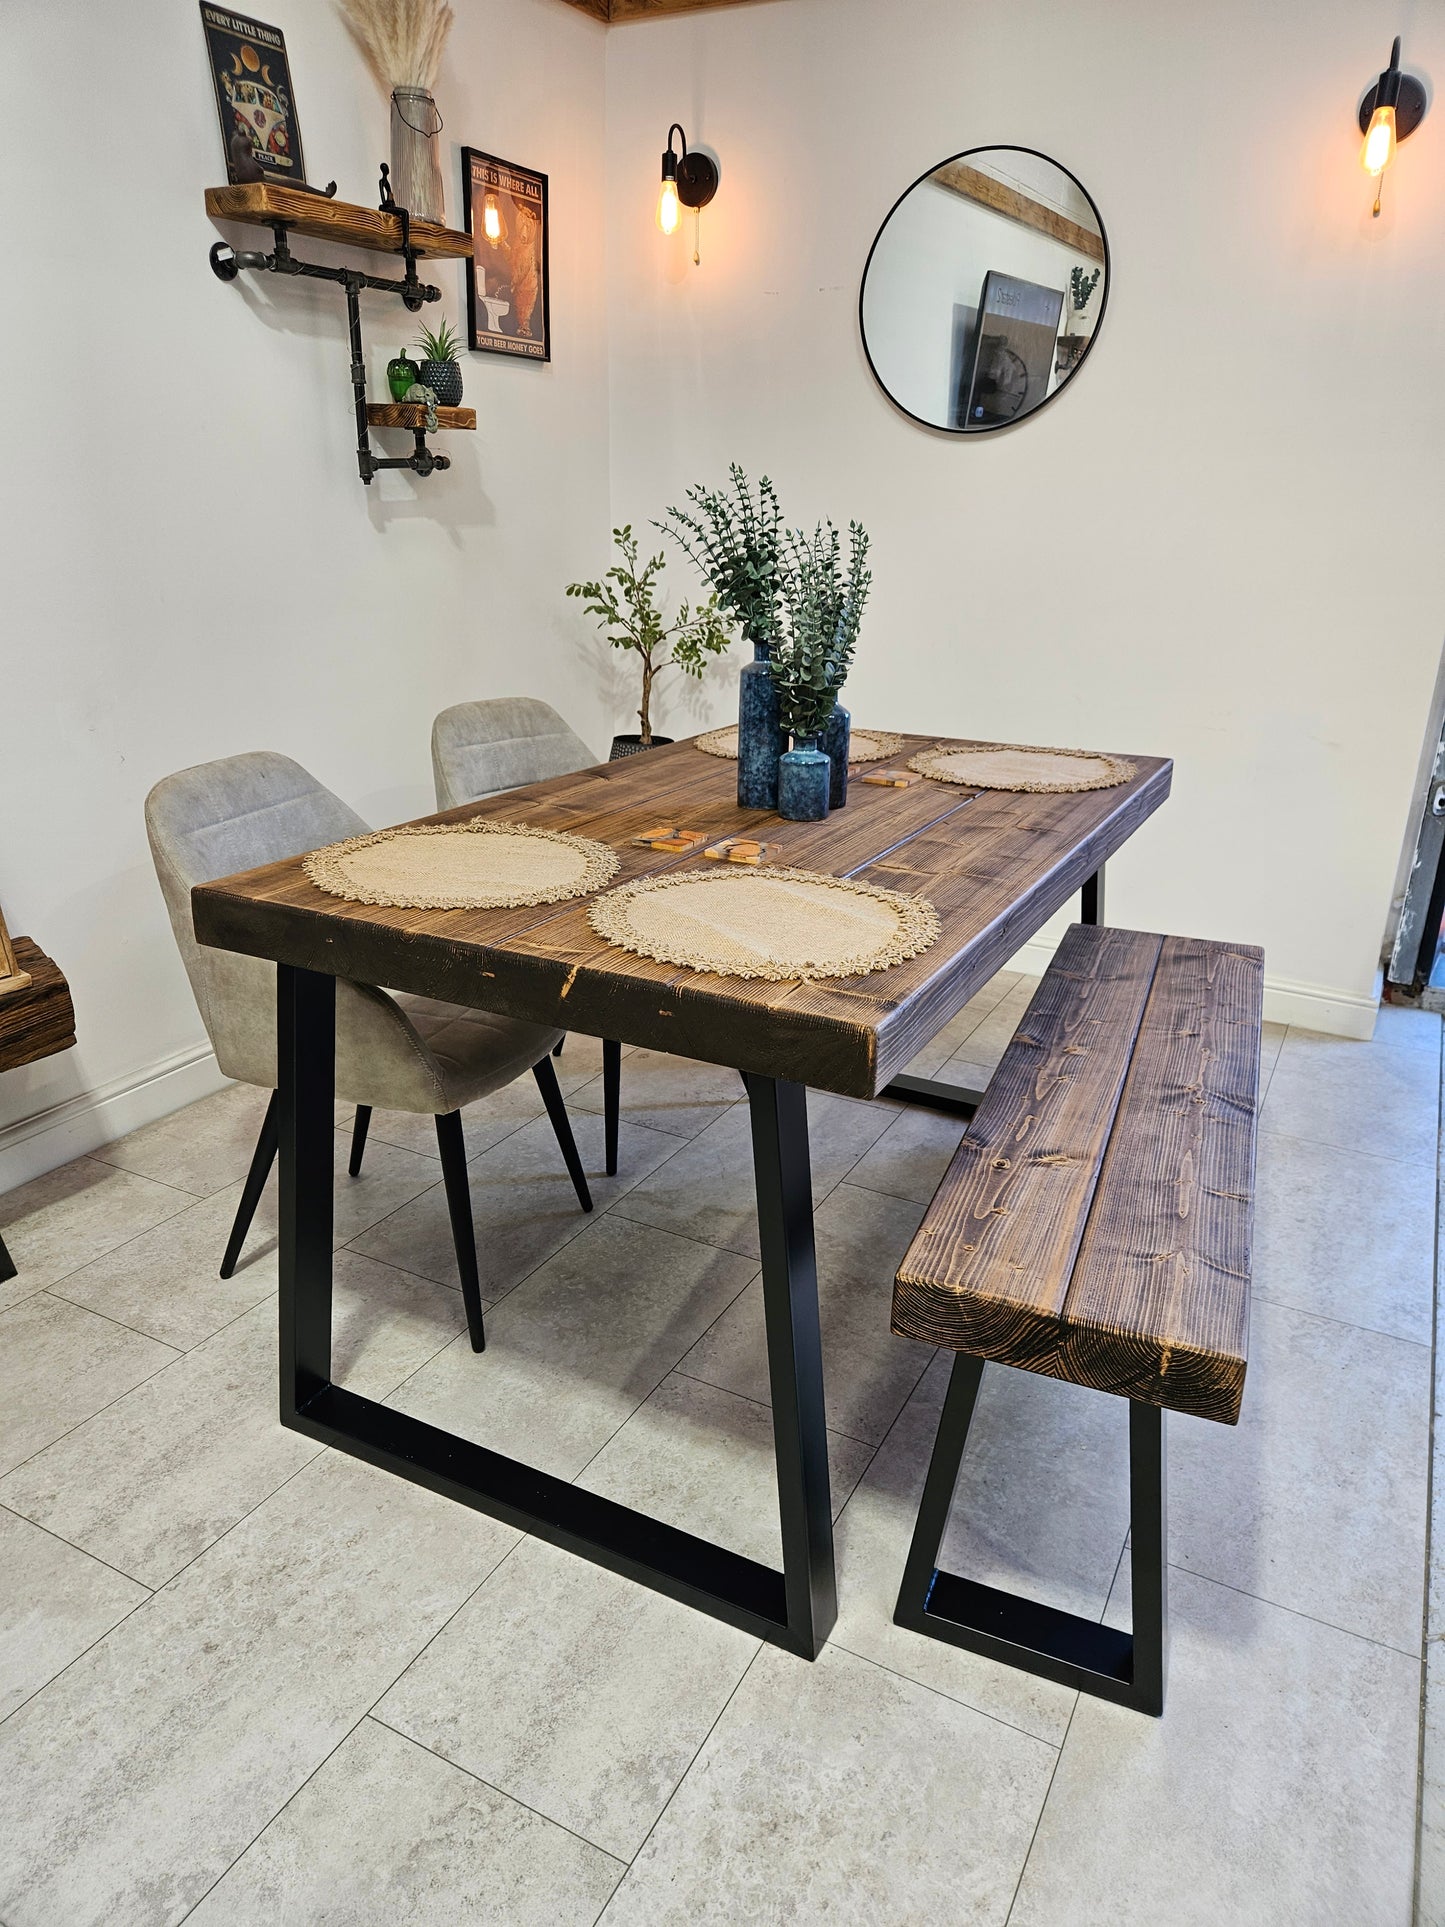 Dining table with trapezoid legs